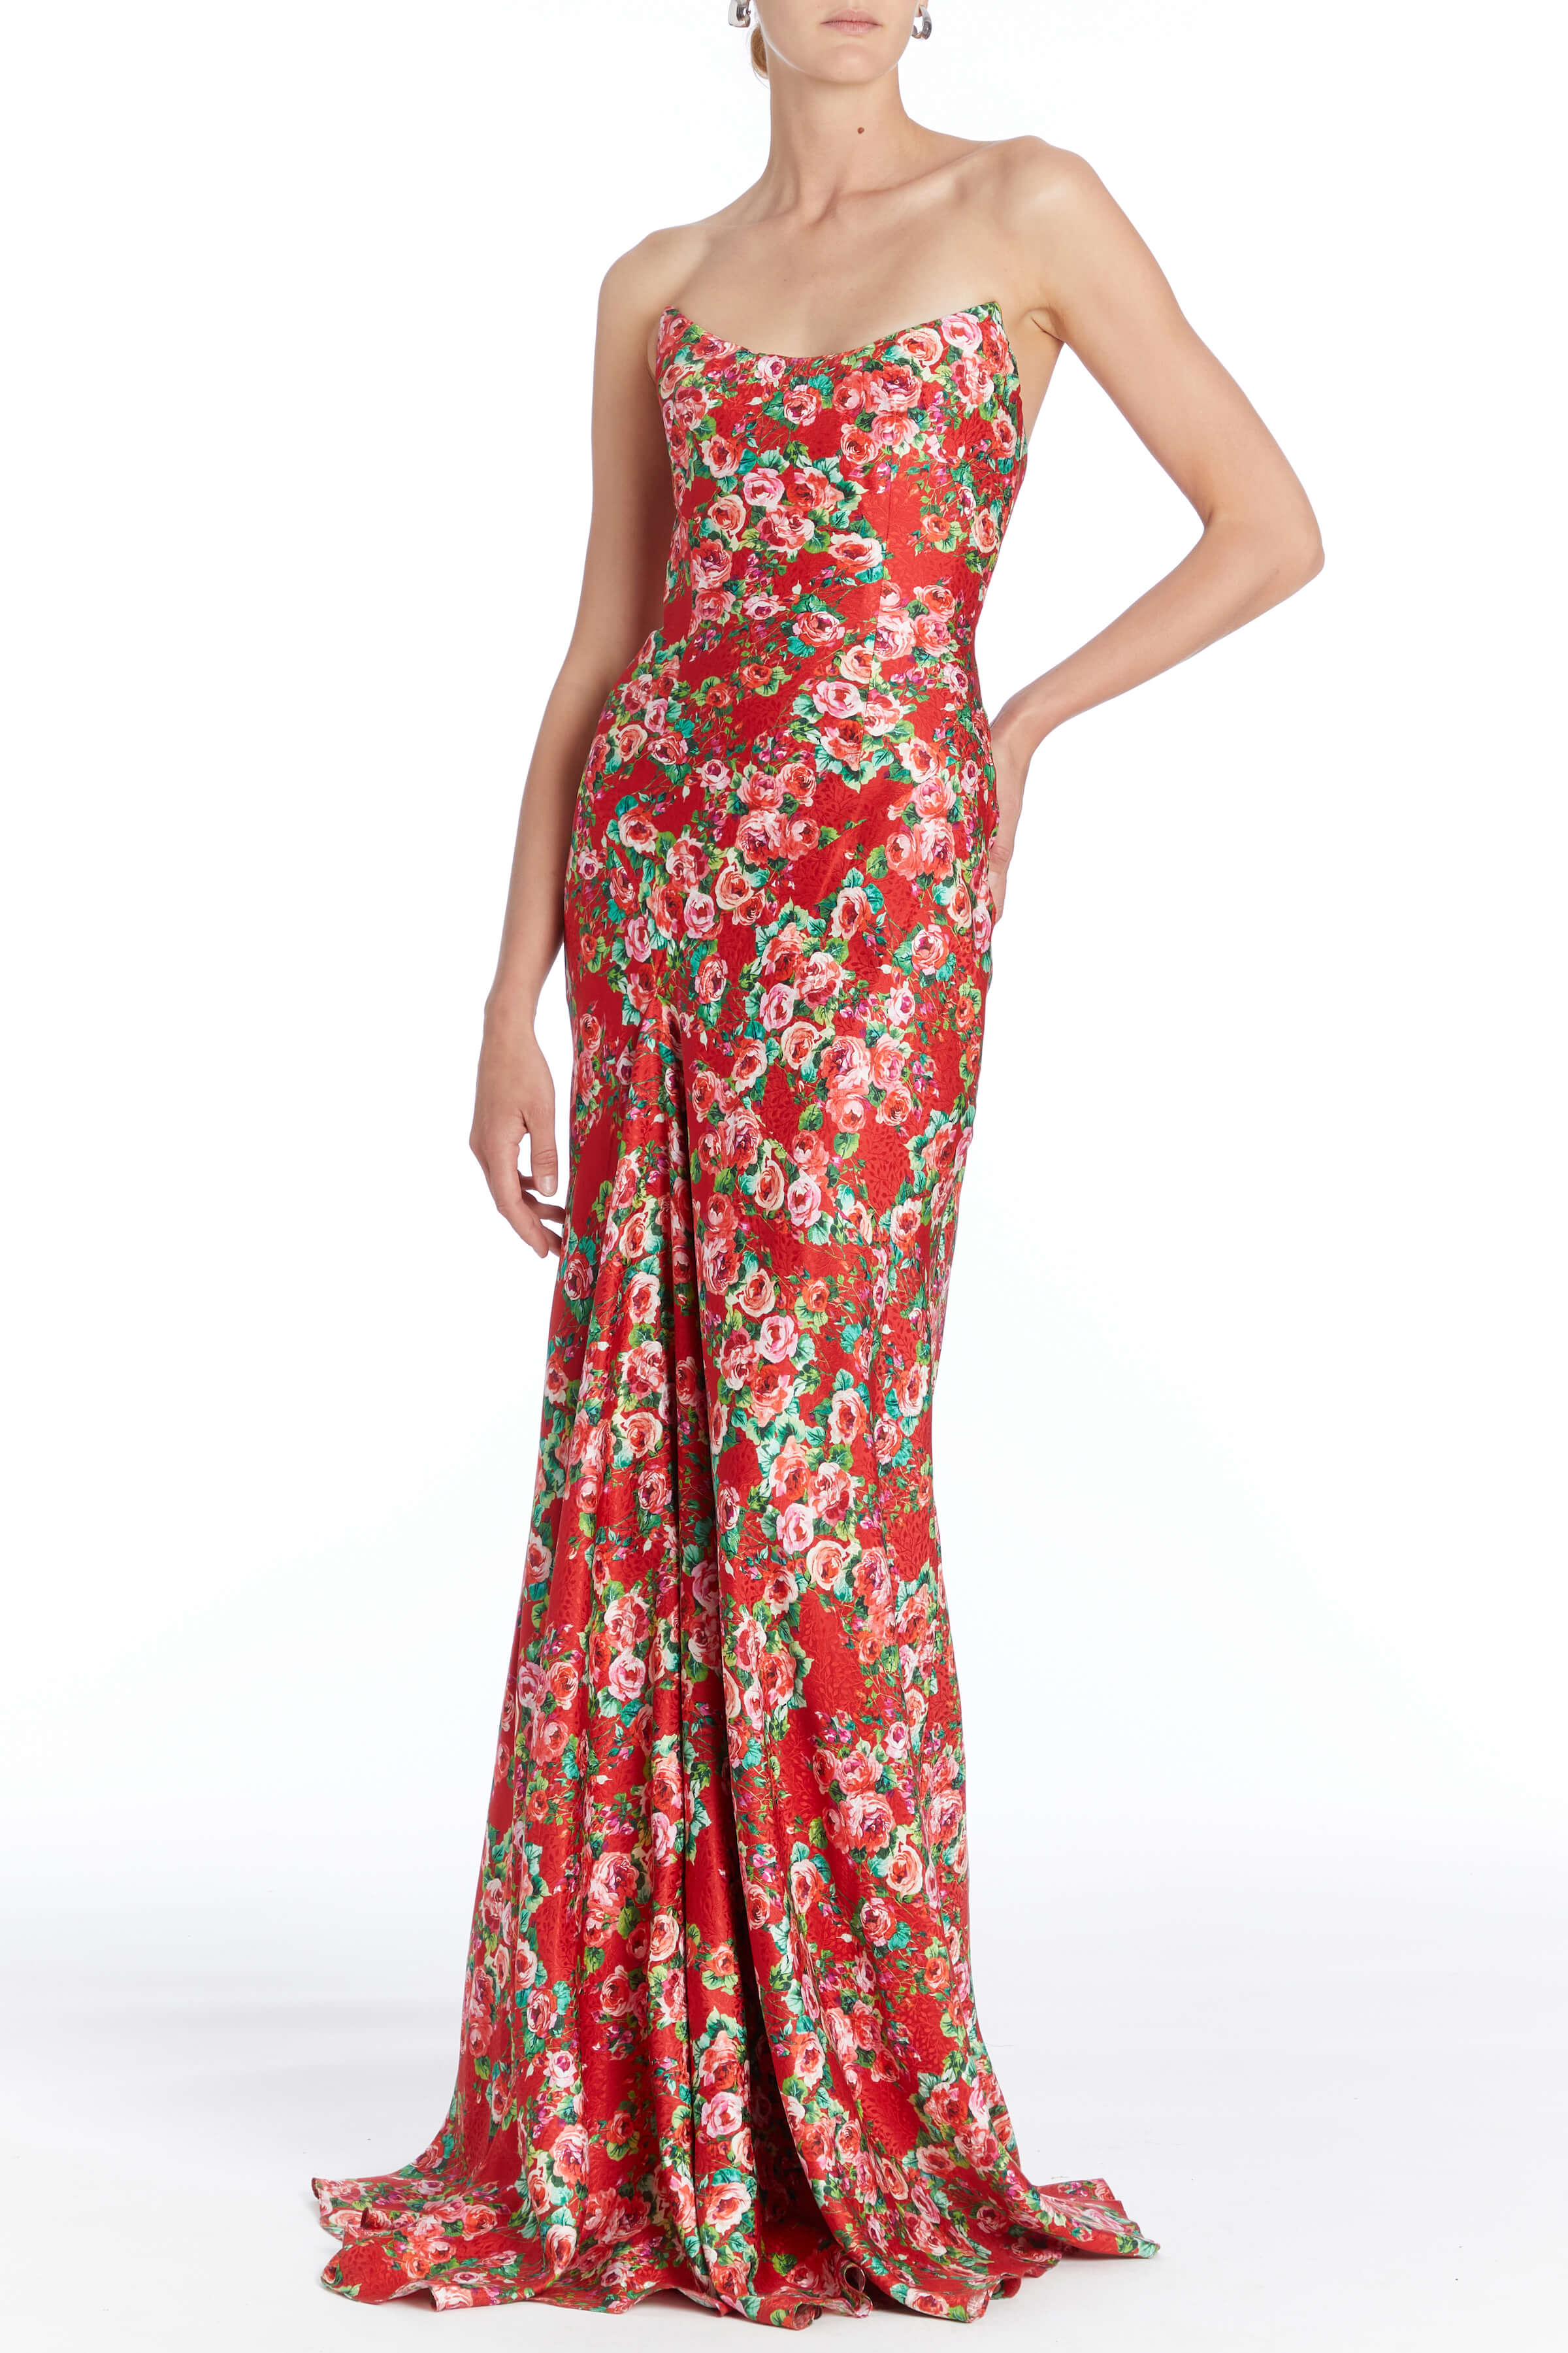 Tallulah Rose Floral Strapless Gown